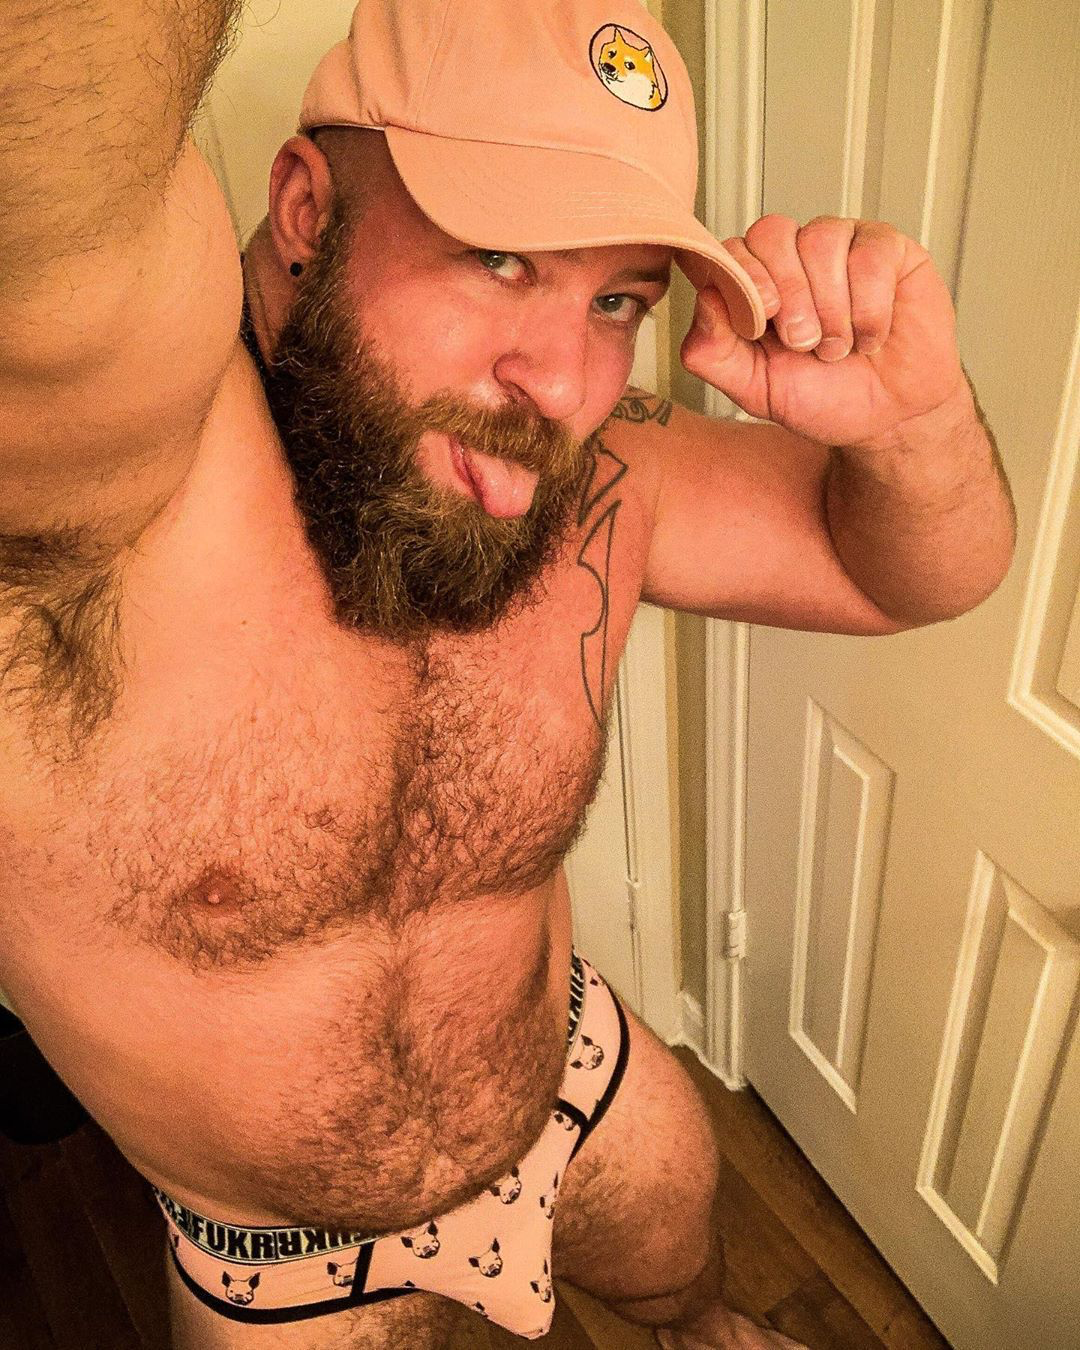 Photo by Smitty with the username @Resol702,  January 13, 2020 at 8:55 PM. The post is about the topic Hairy bears